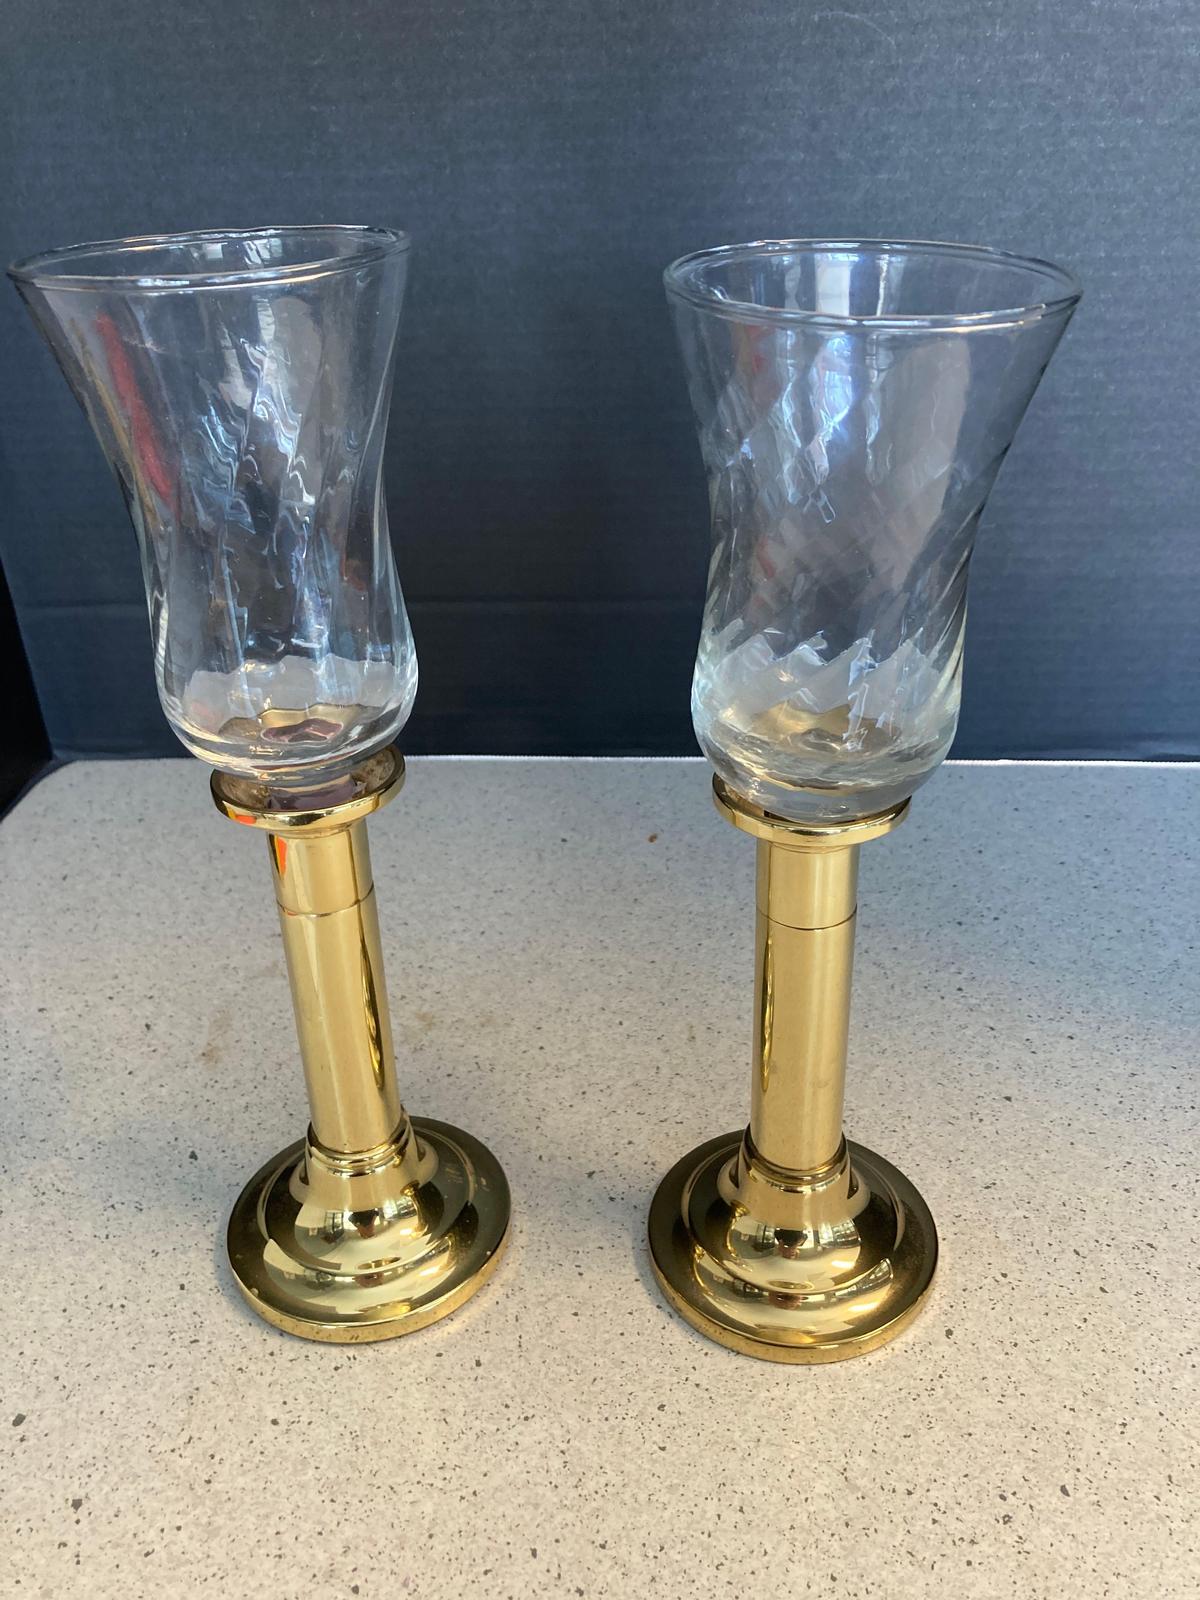 Pair of Baldwin brass candlesticks with shades